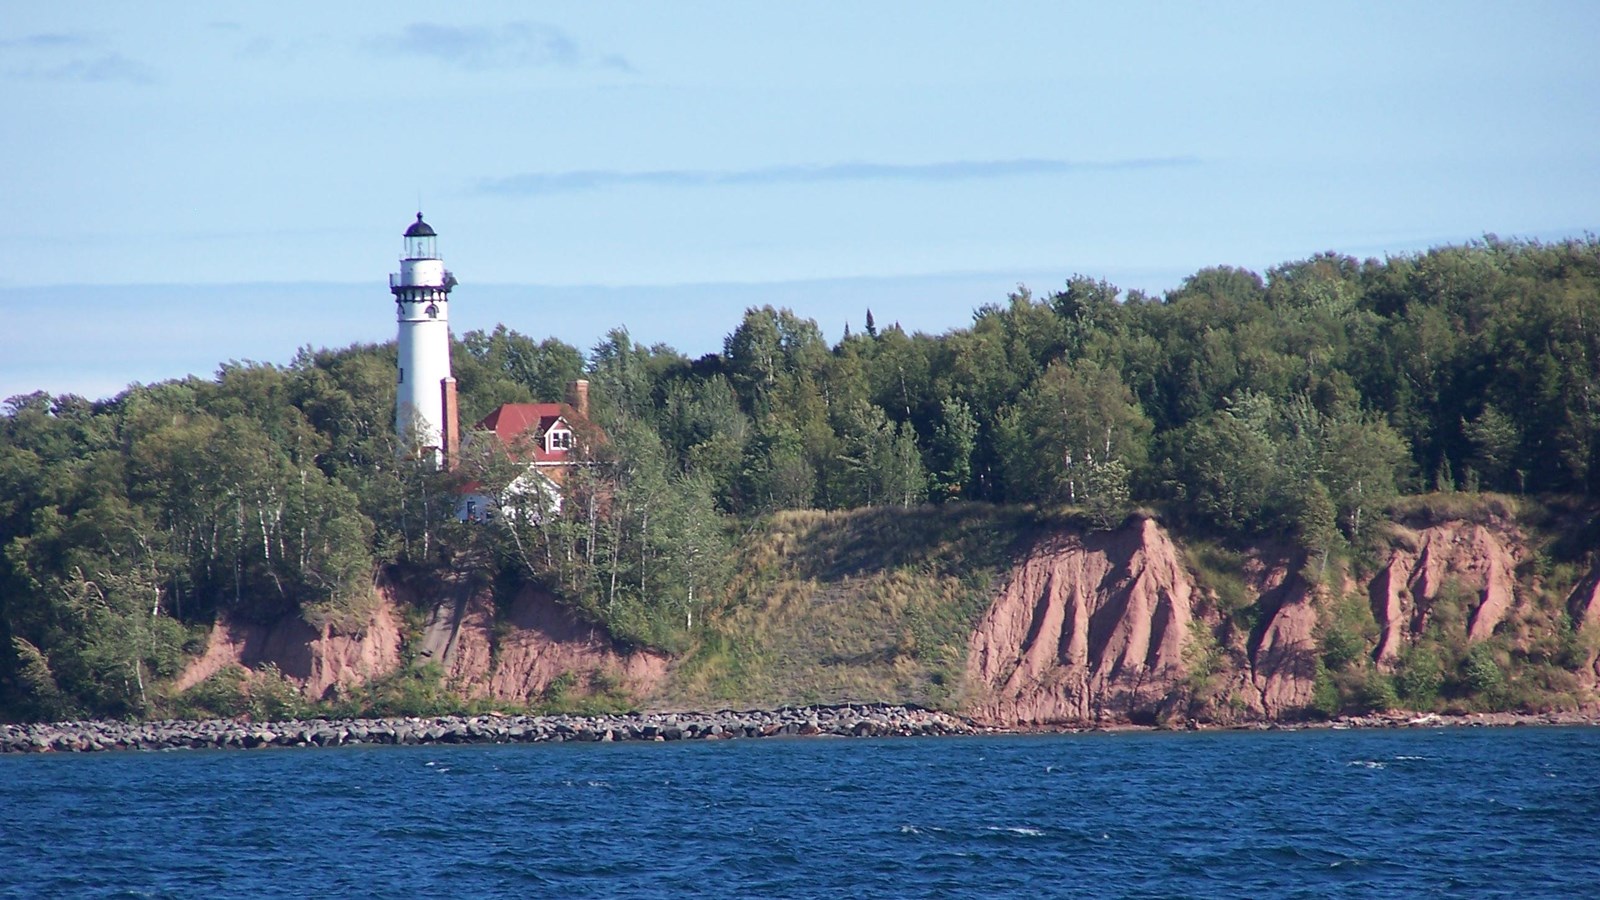 A white lighthouse tower stands tall on a steep clay bank with trees on the edge of a lake. 